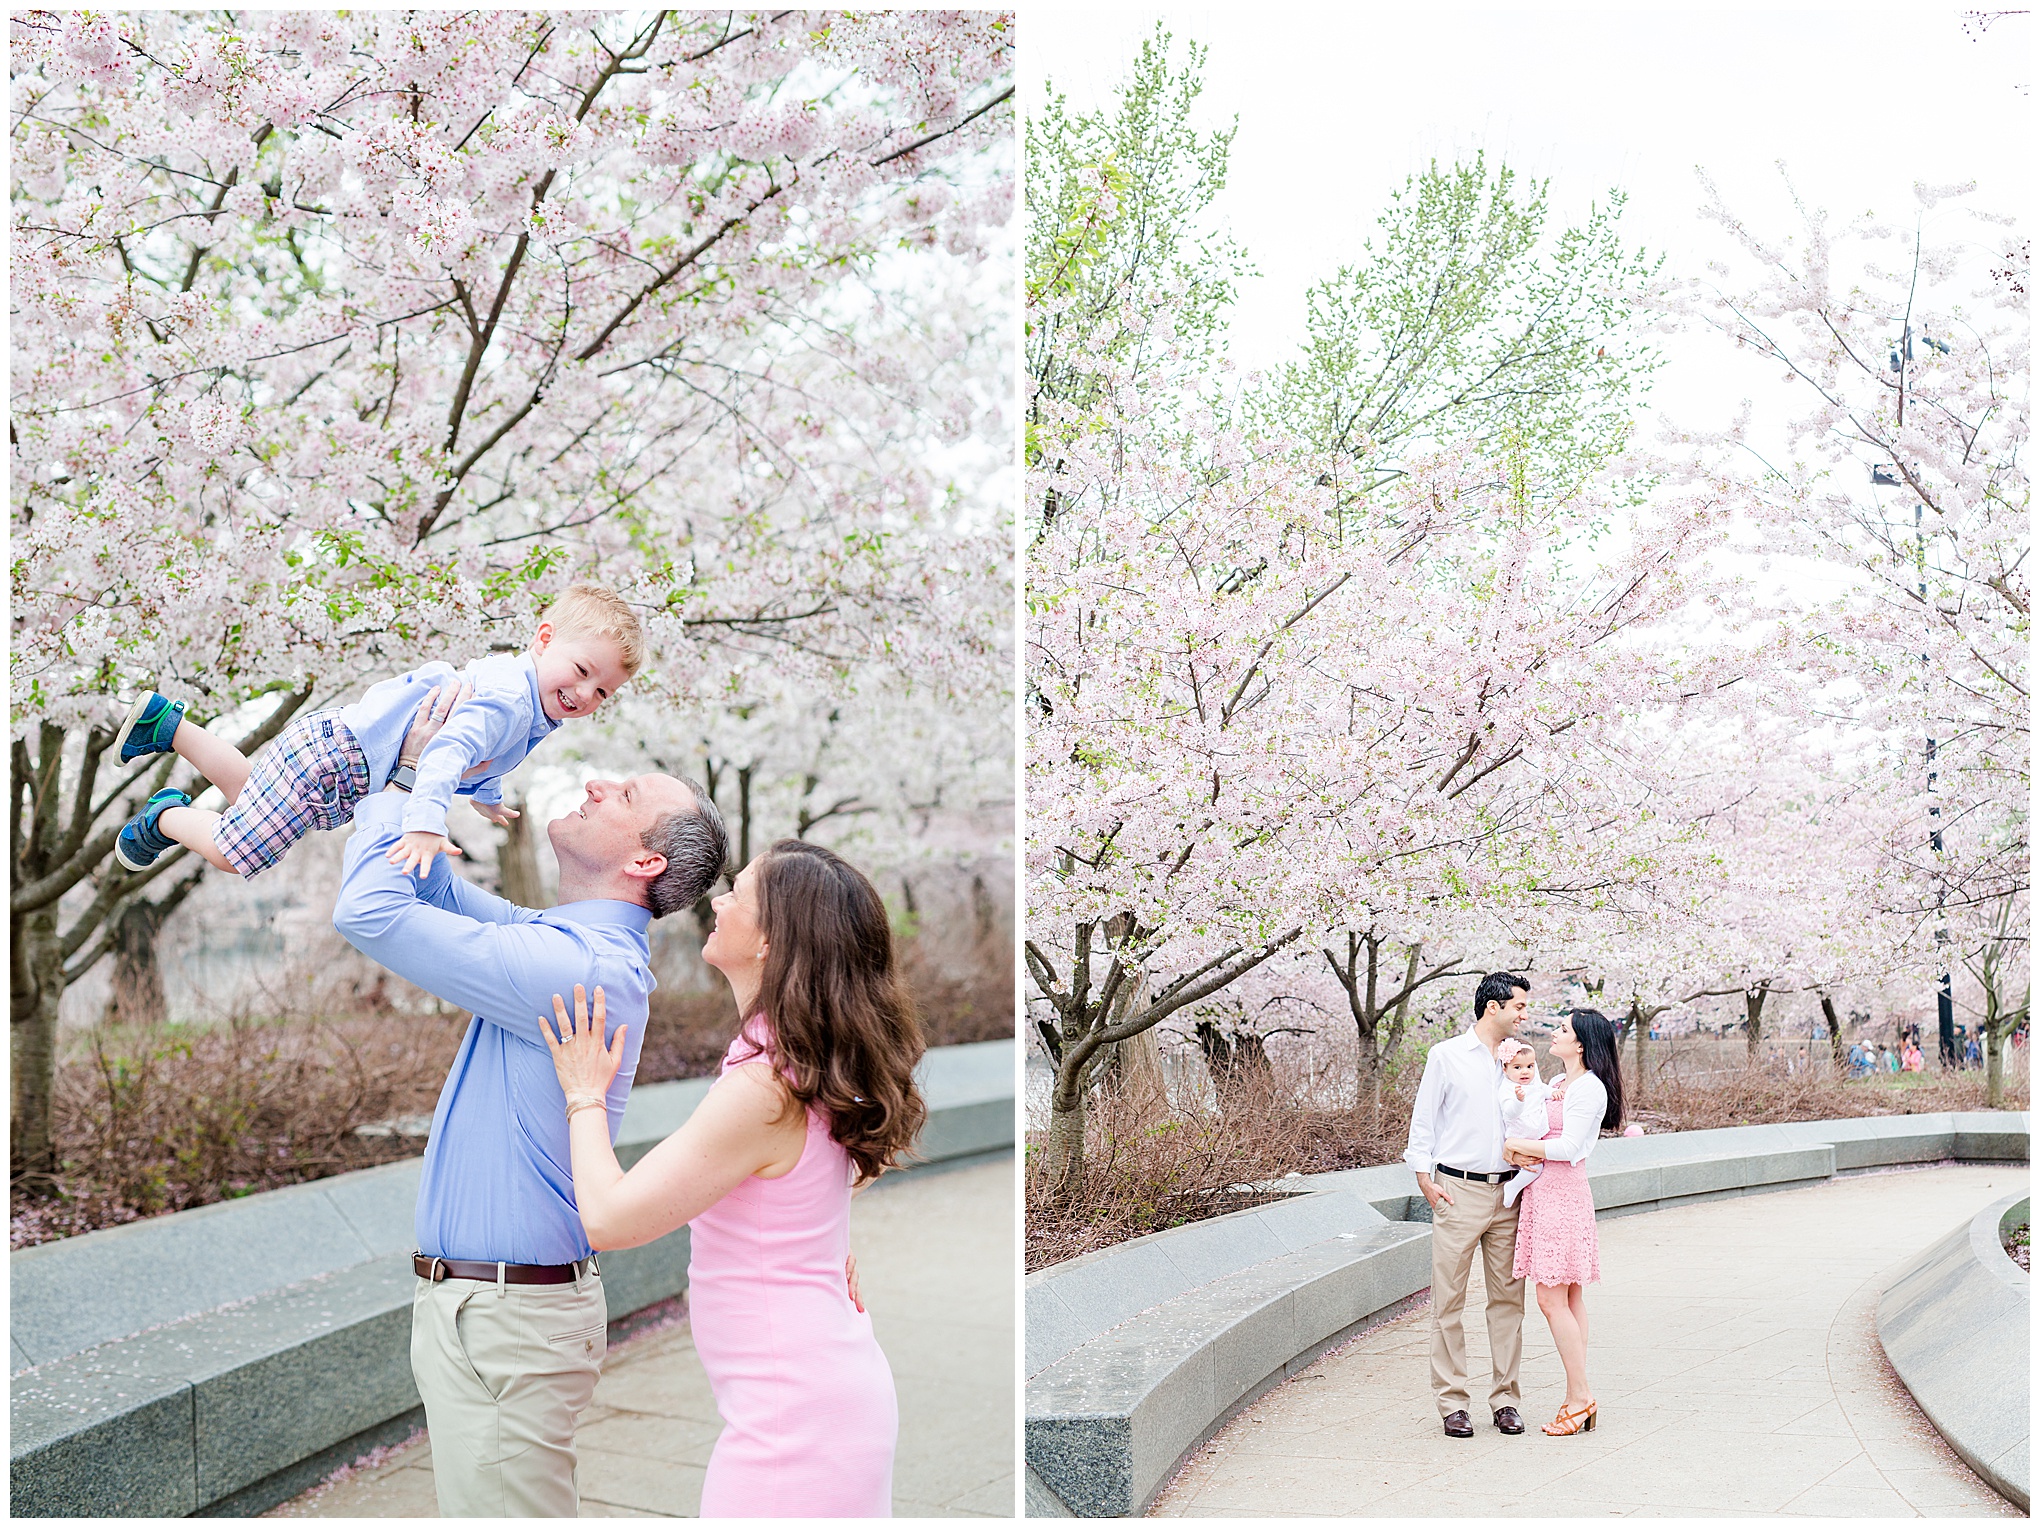 cherry blossoms photo shooot outfit ideas, D.C. cherry blossoms photographer, D.C. cherry blossoms, D.C. tidal basin, D.C. photographer, D.C. engagement photographer, D.C. wedding photographer, Rachel E.H. Photography, spring portraits, photo shoot outfits, spring outfits, family of three